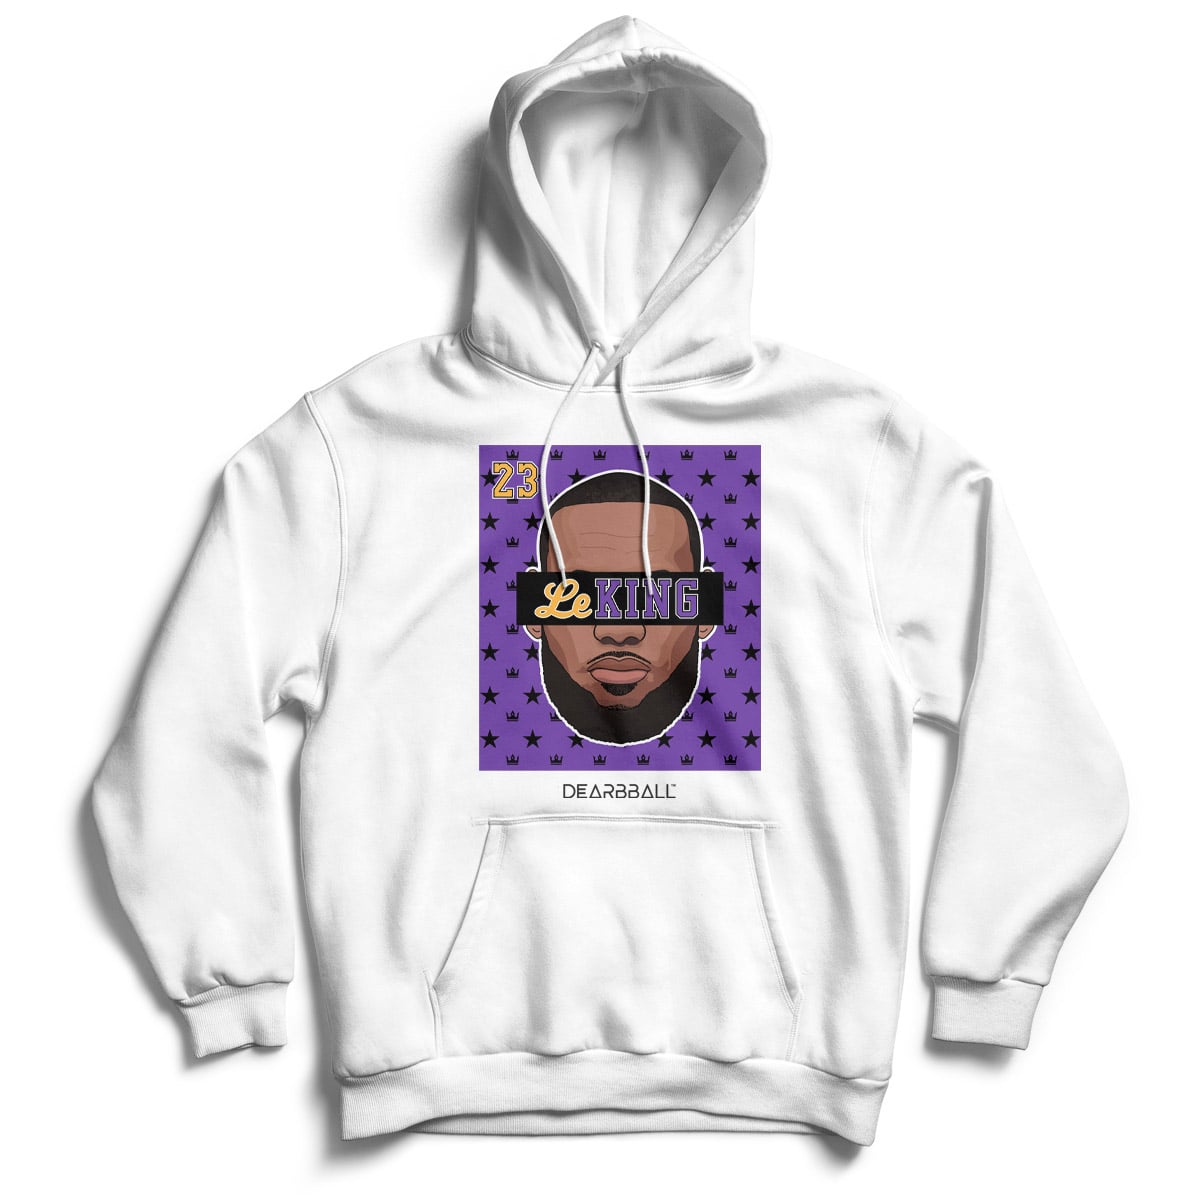 DearBBall Sweat à Capuche - Le KING 23 Los Angeles Stars Edition